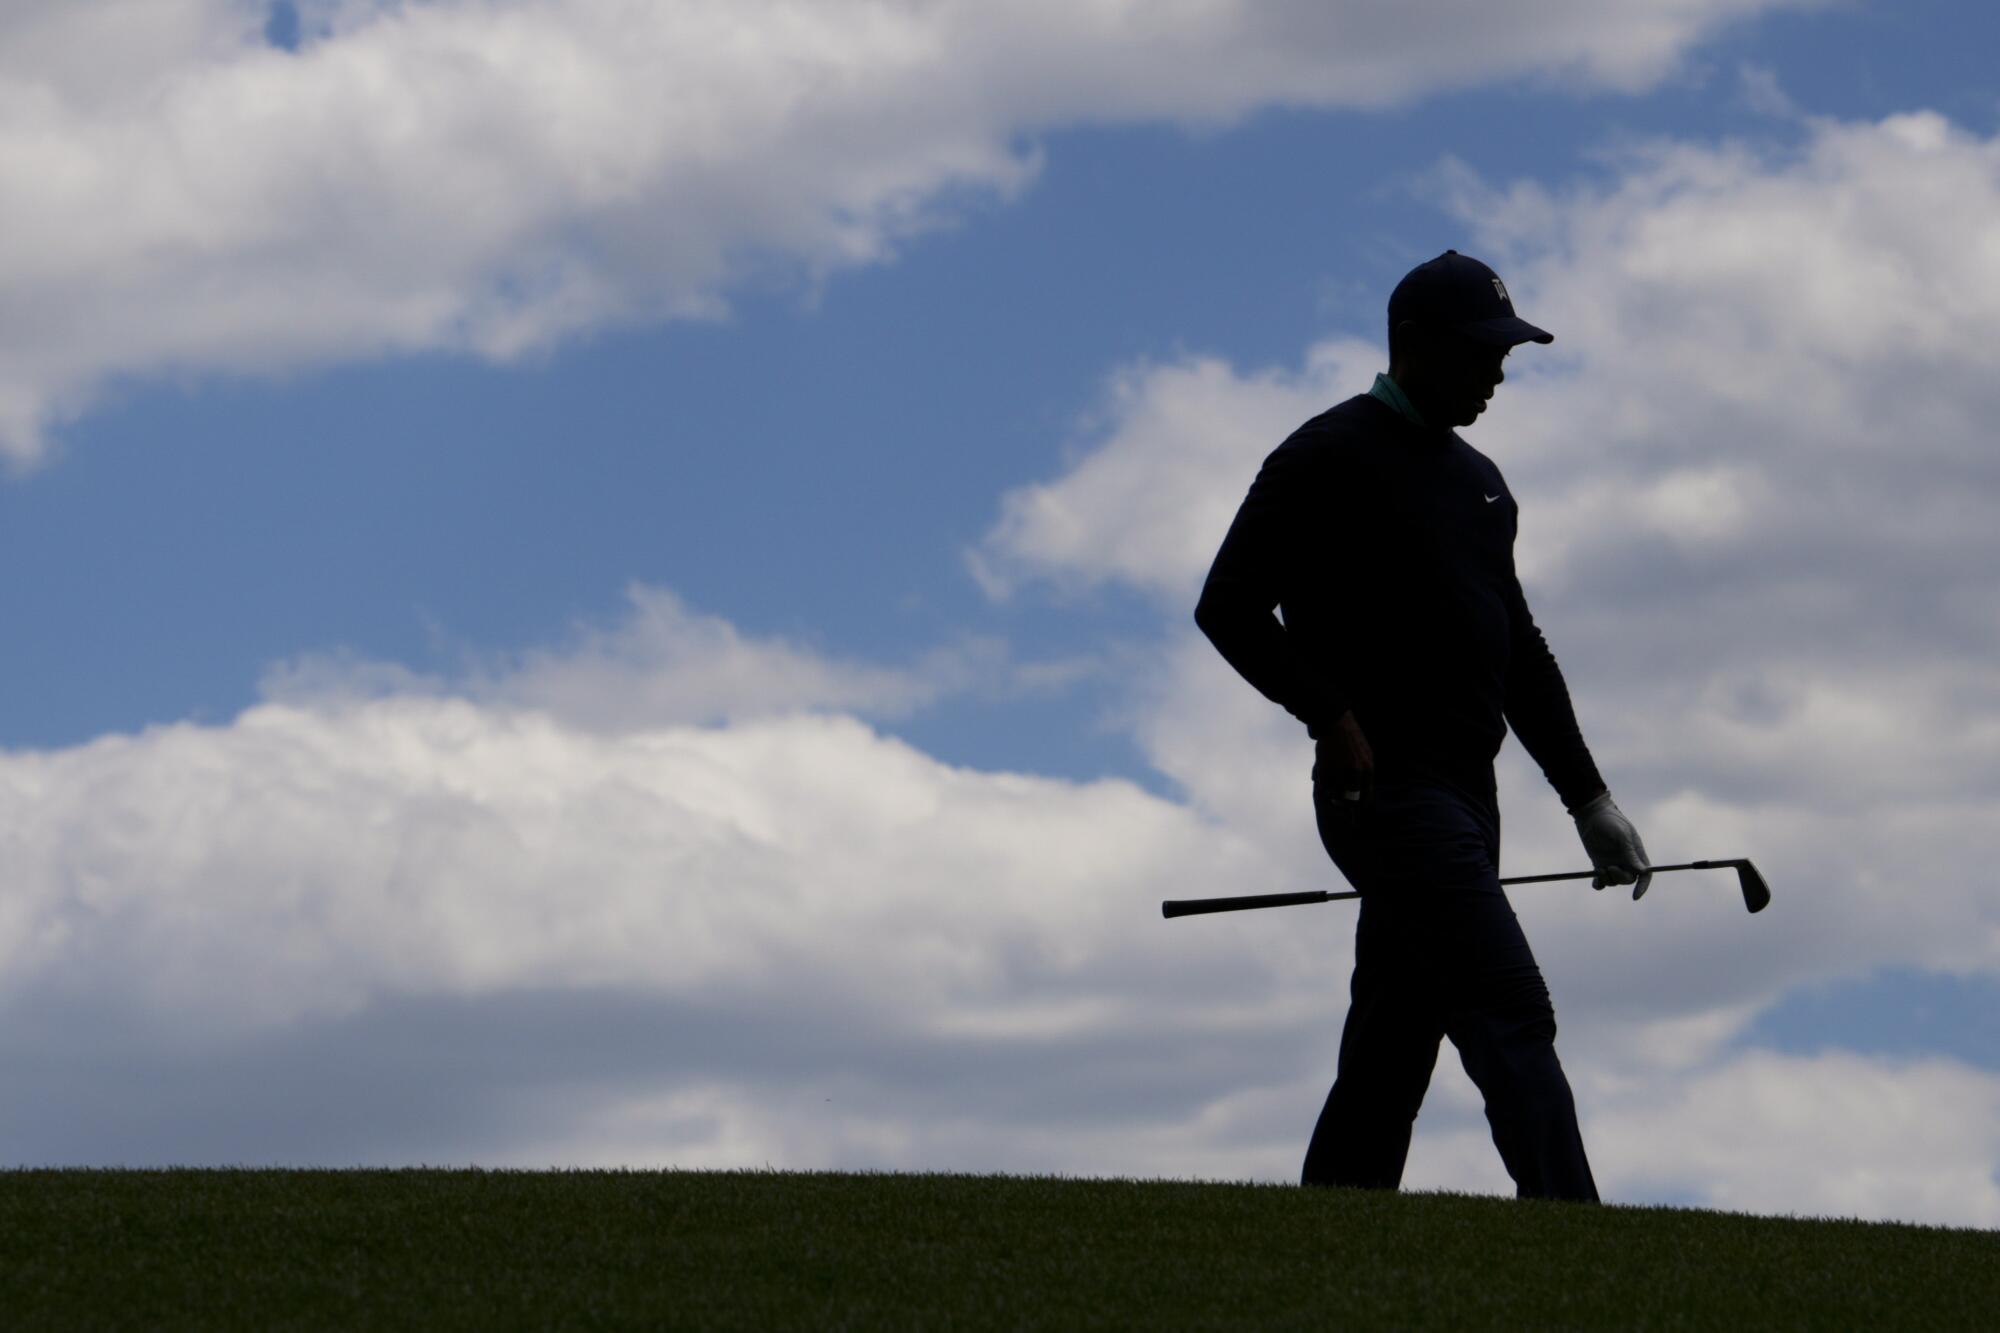 Tiger Woods walks on the fourth fairway during the second round at the Masters golf tournament